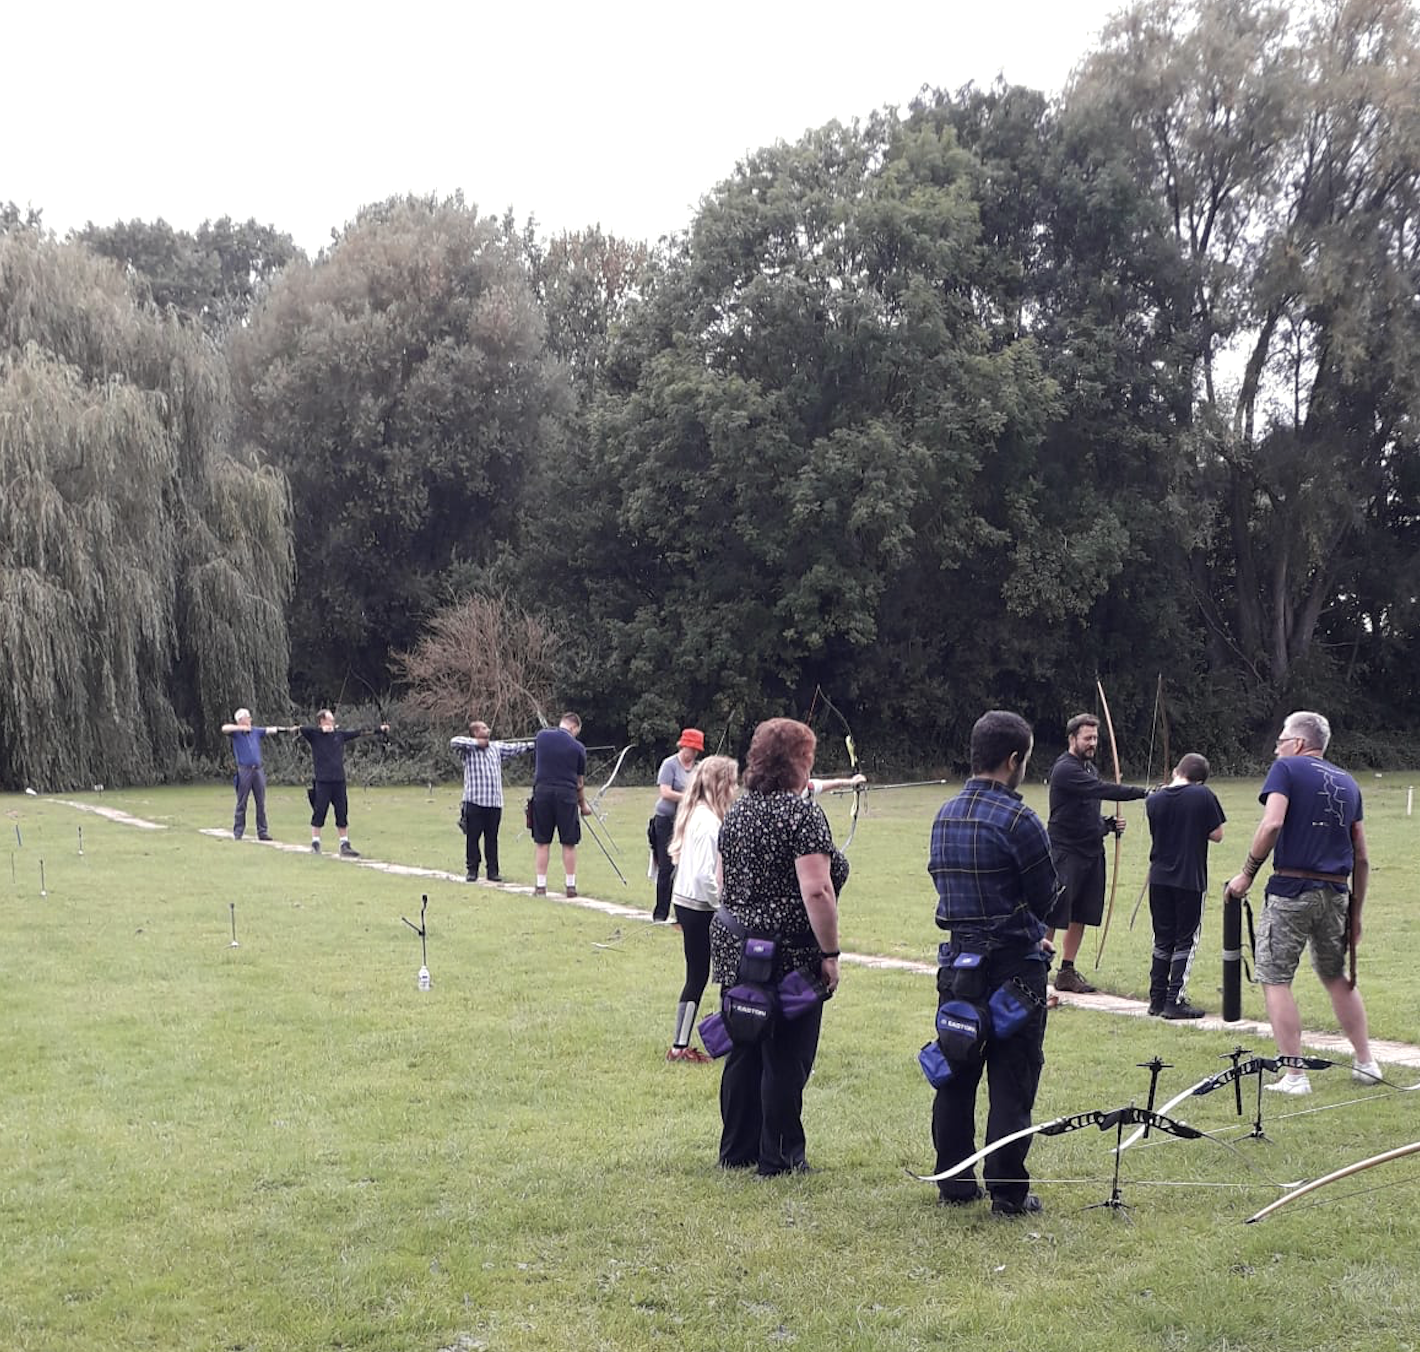 Archery at Imber Courtpng